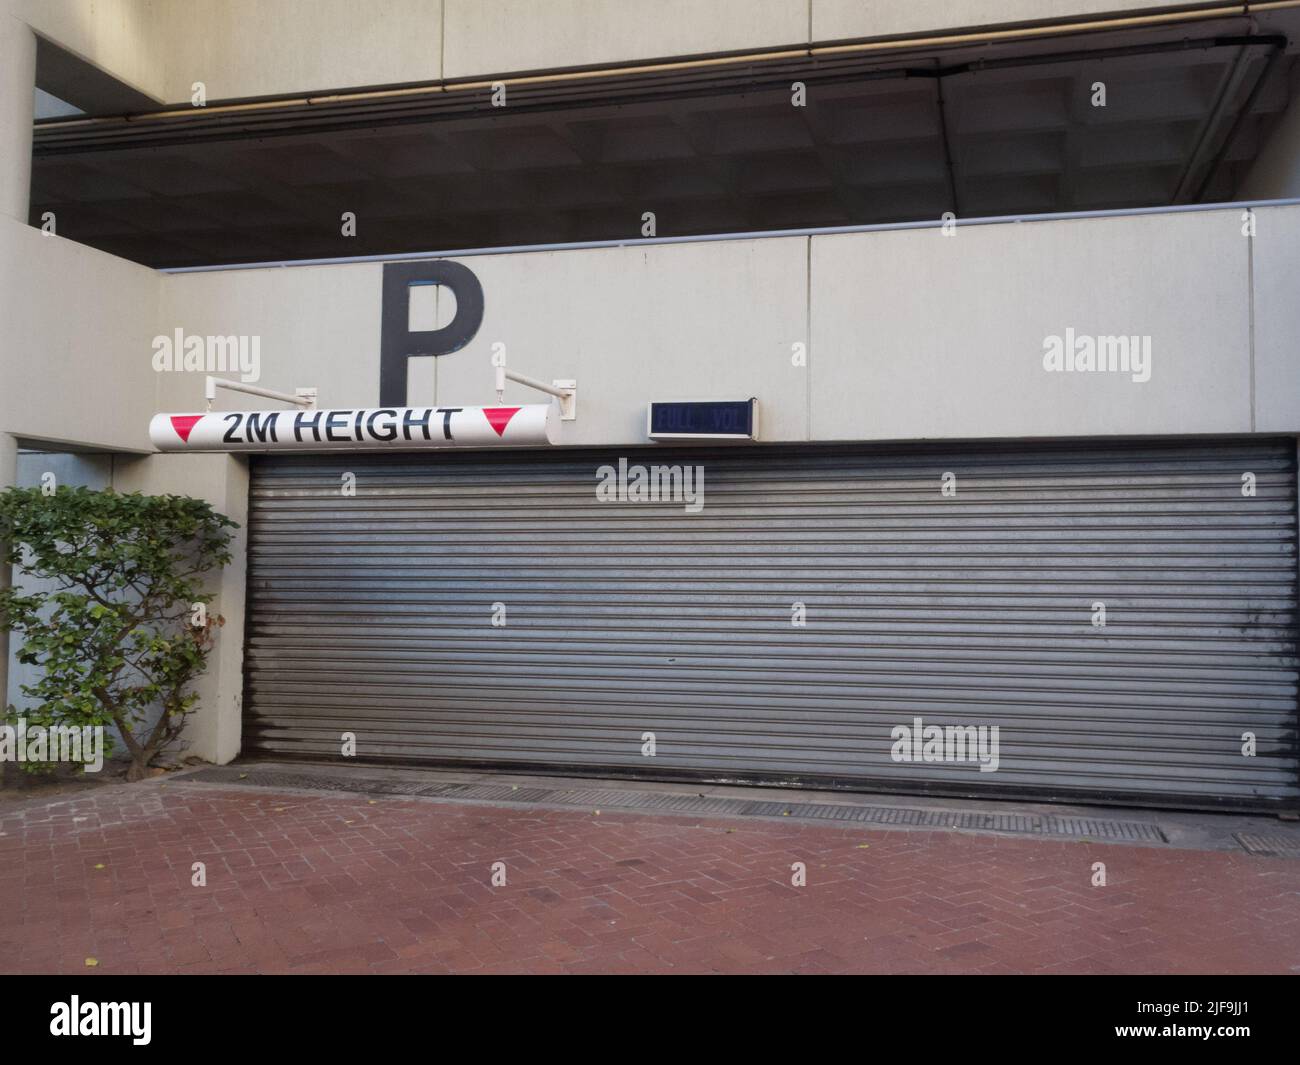 closed metal garage door at a parking garage with a maximum height restriction sign of 2 metres in a city building Stock Photo